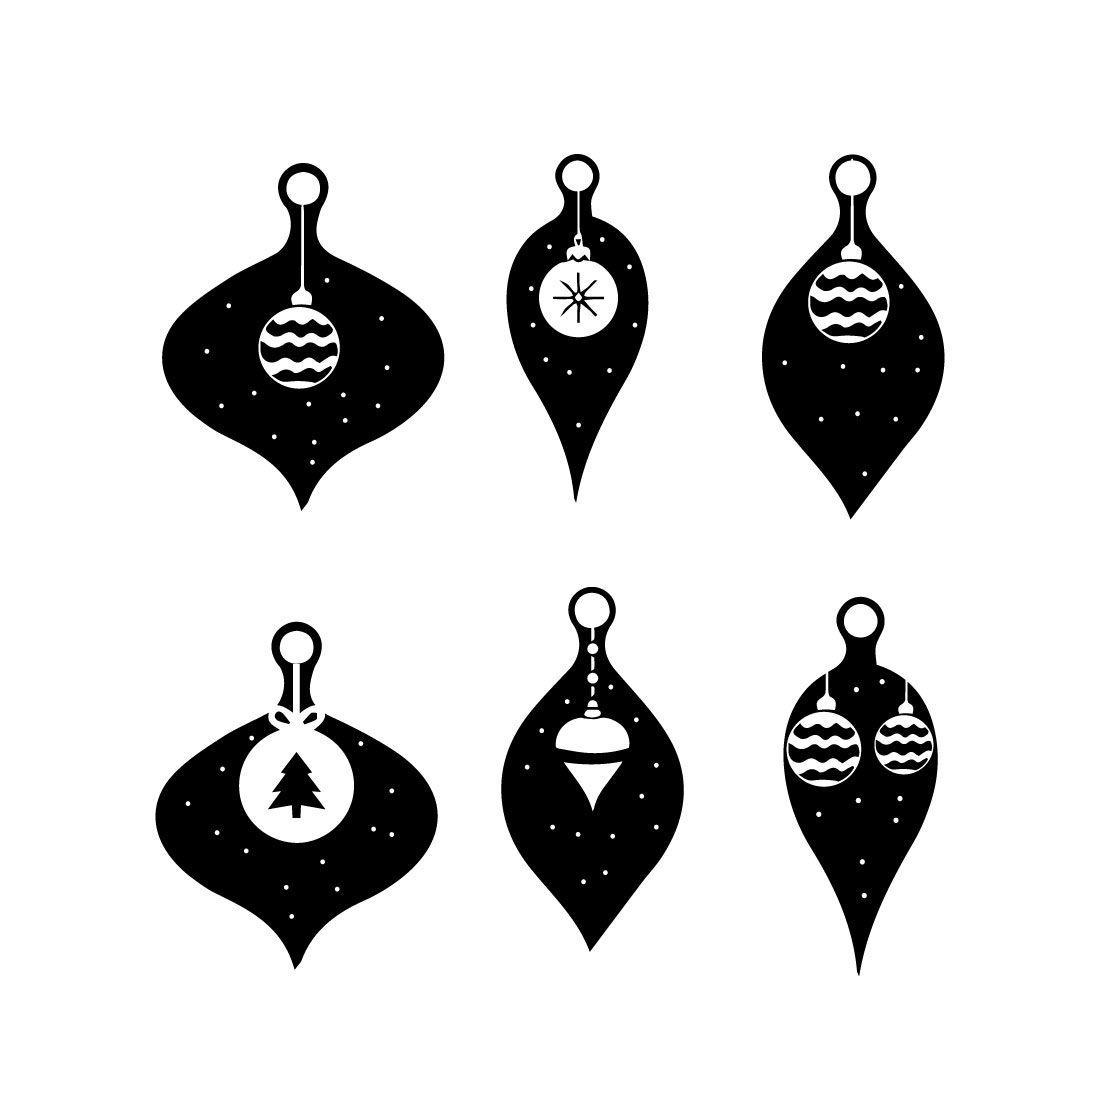 Pack of black adorable images of Christmas decorations